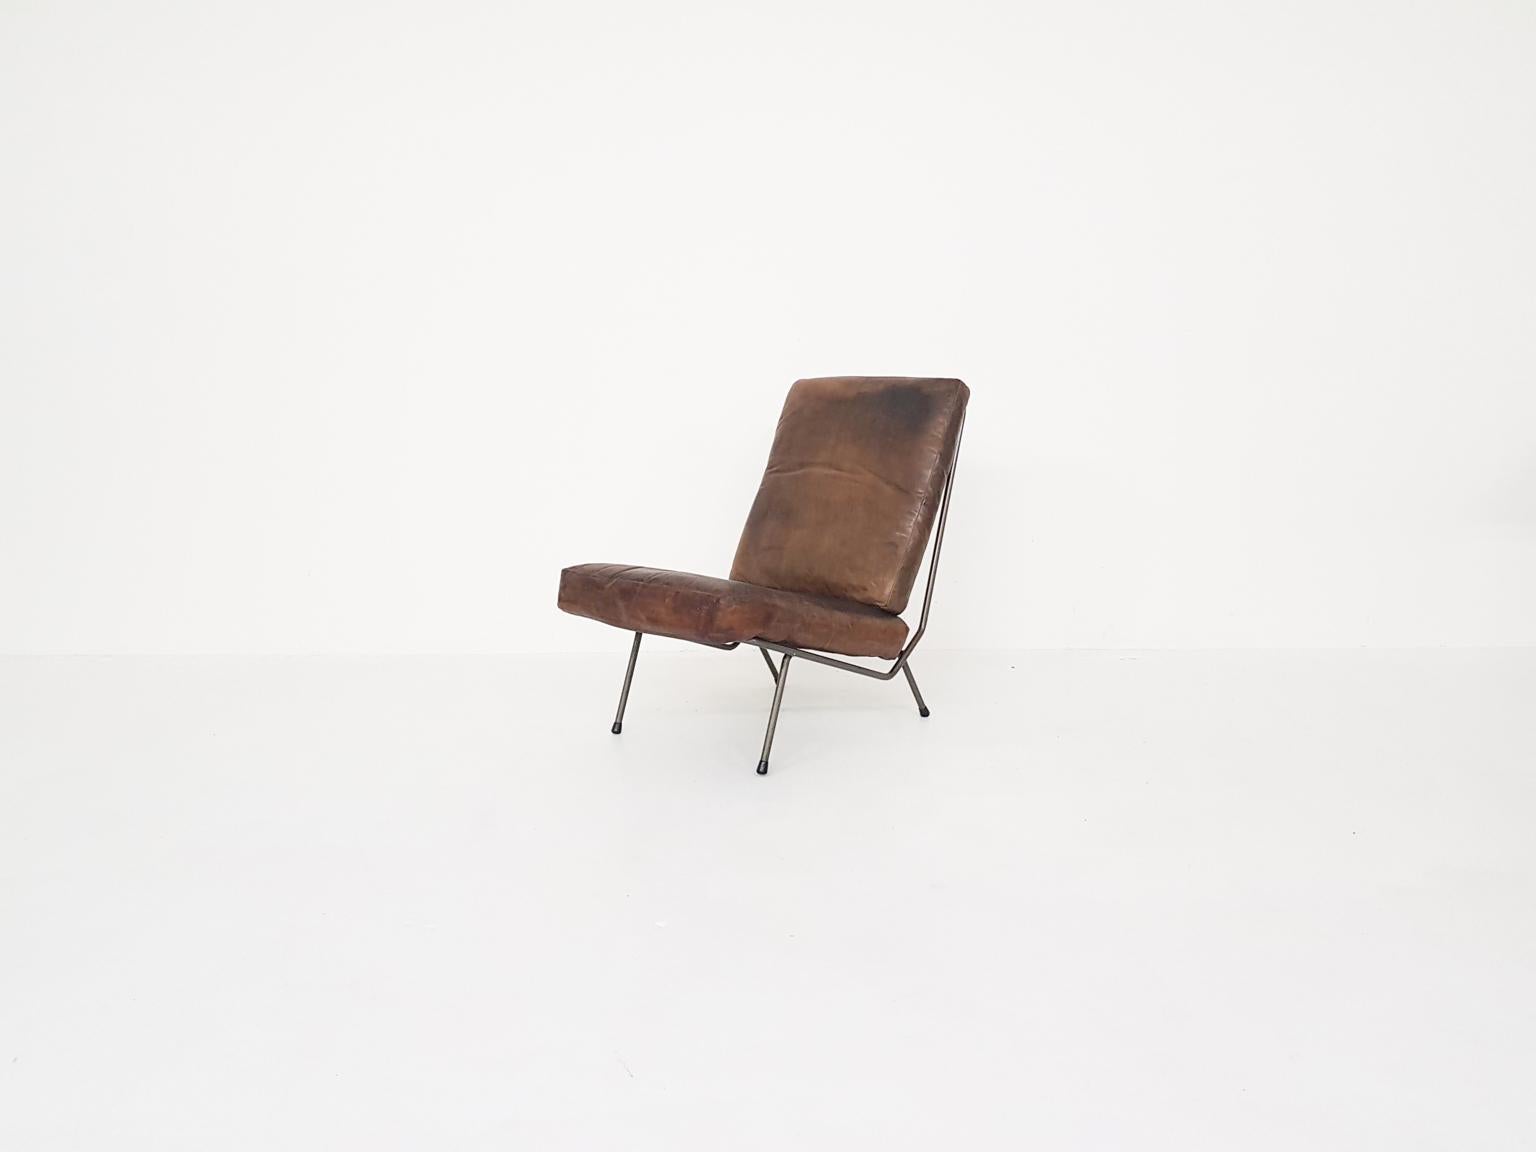 Mid-Century Modern Koene Oberman for Gelderland Lounge Chair in Leather, The Netherlands 1954 For Sale